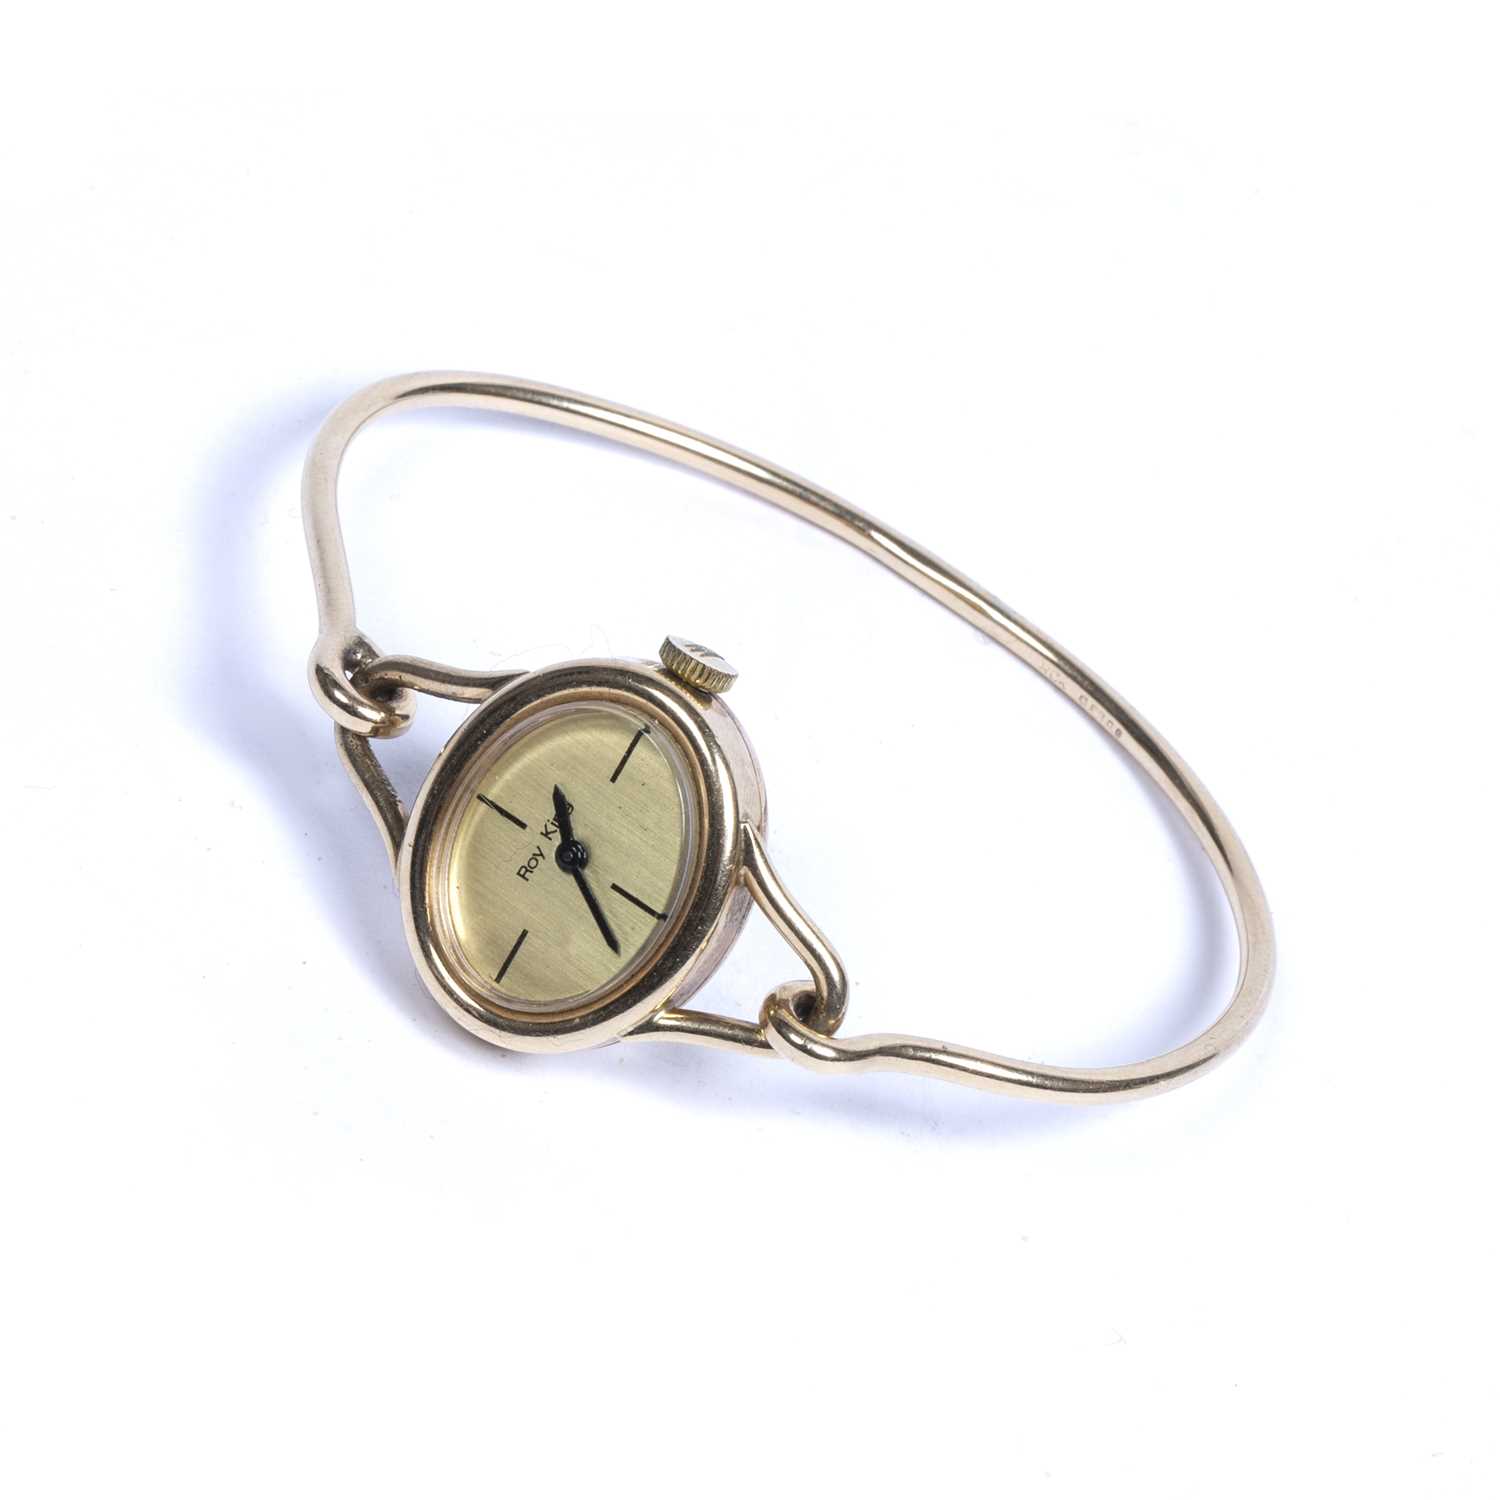 Lady's watch on bangle strap by Roy King 9ct gold, hallmarked to the bangle, and to the case, 6cm